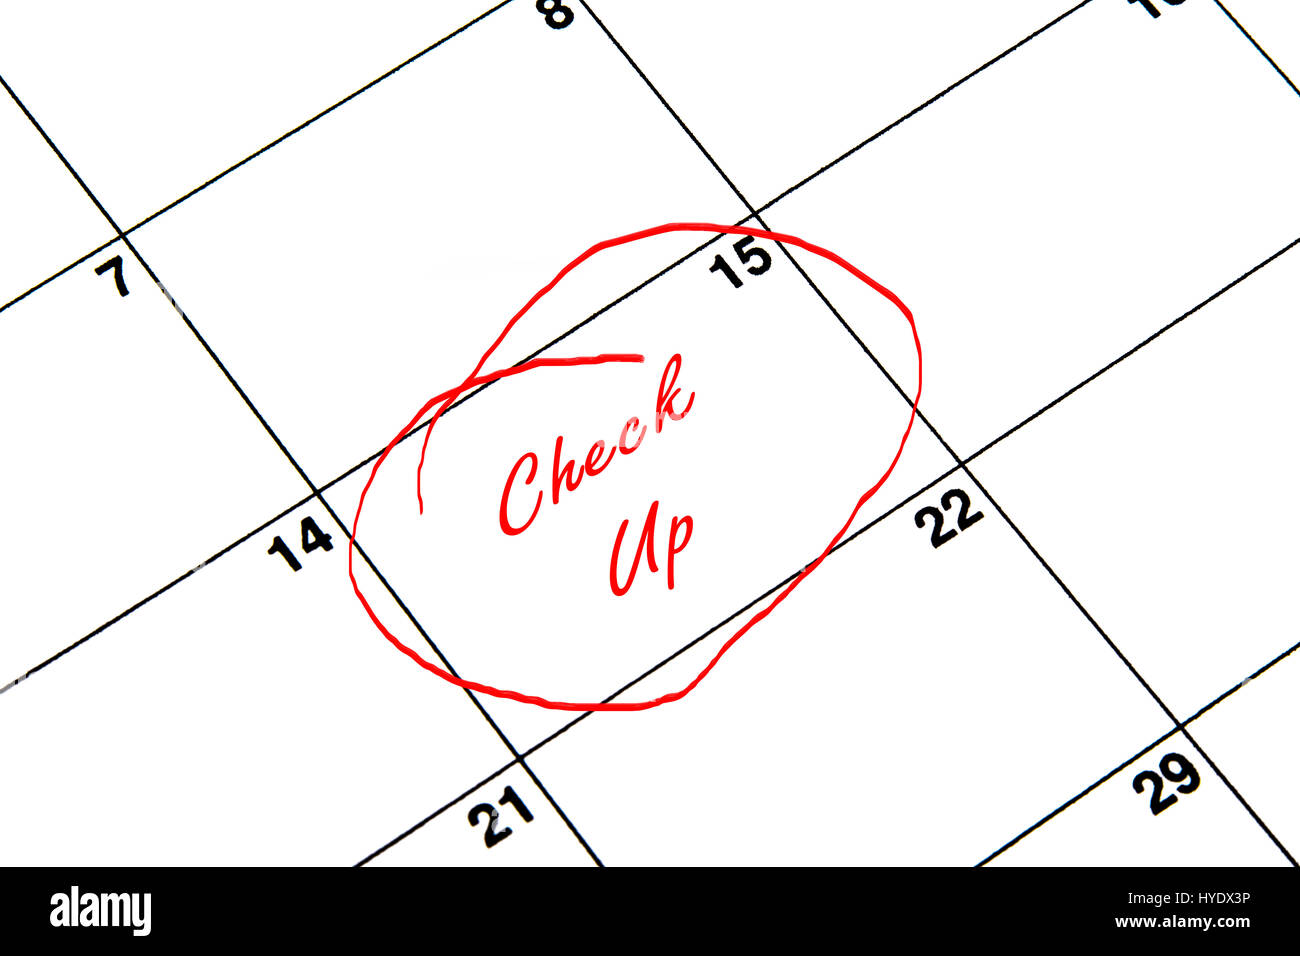 Check Up Circled on A Calendar in Red Stock Photo